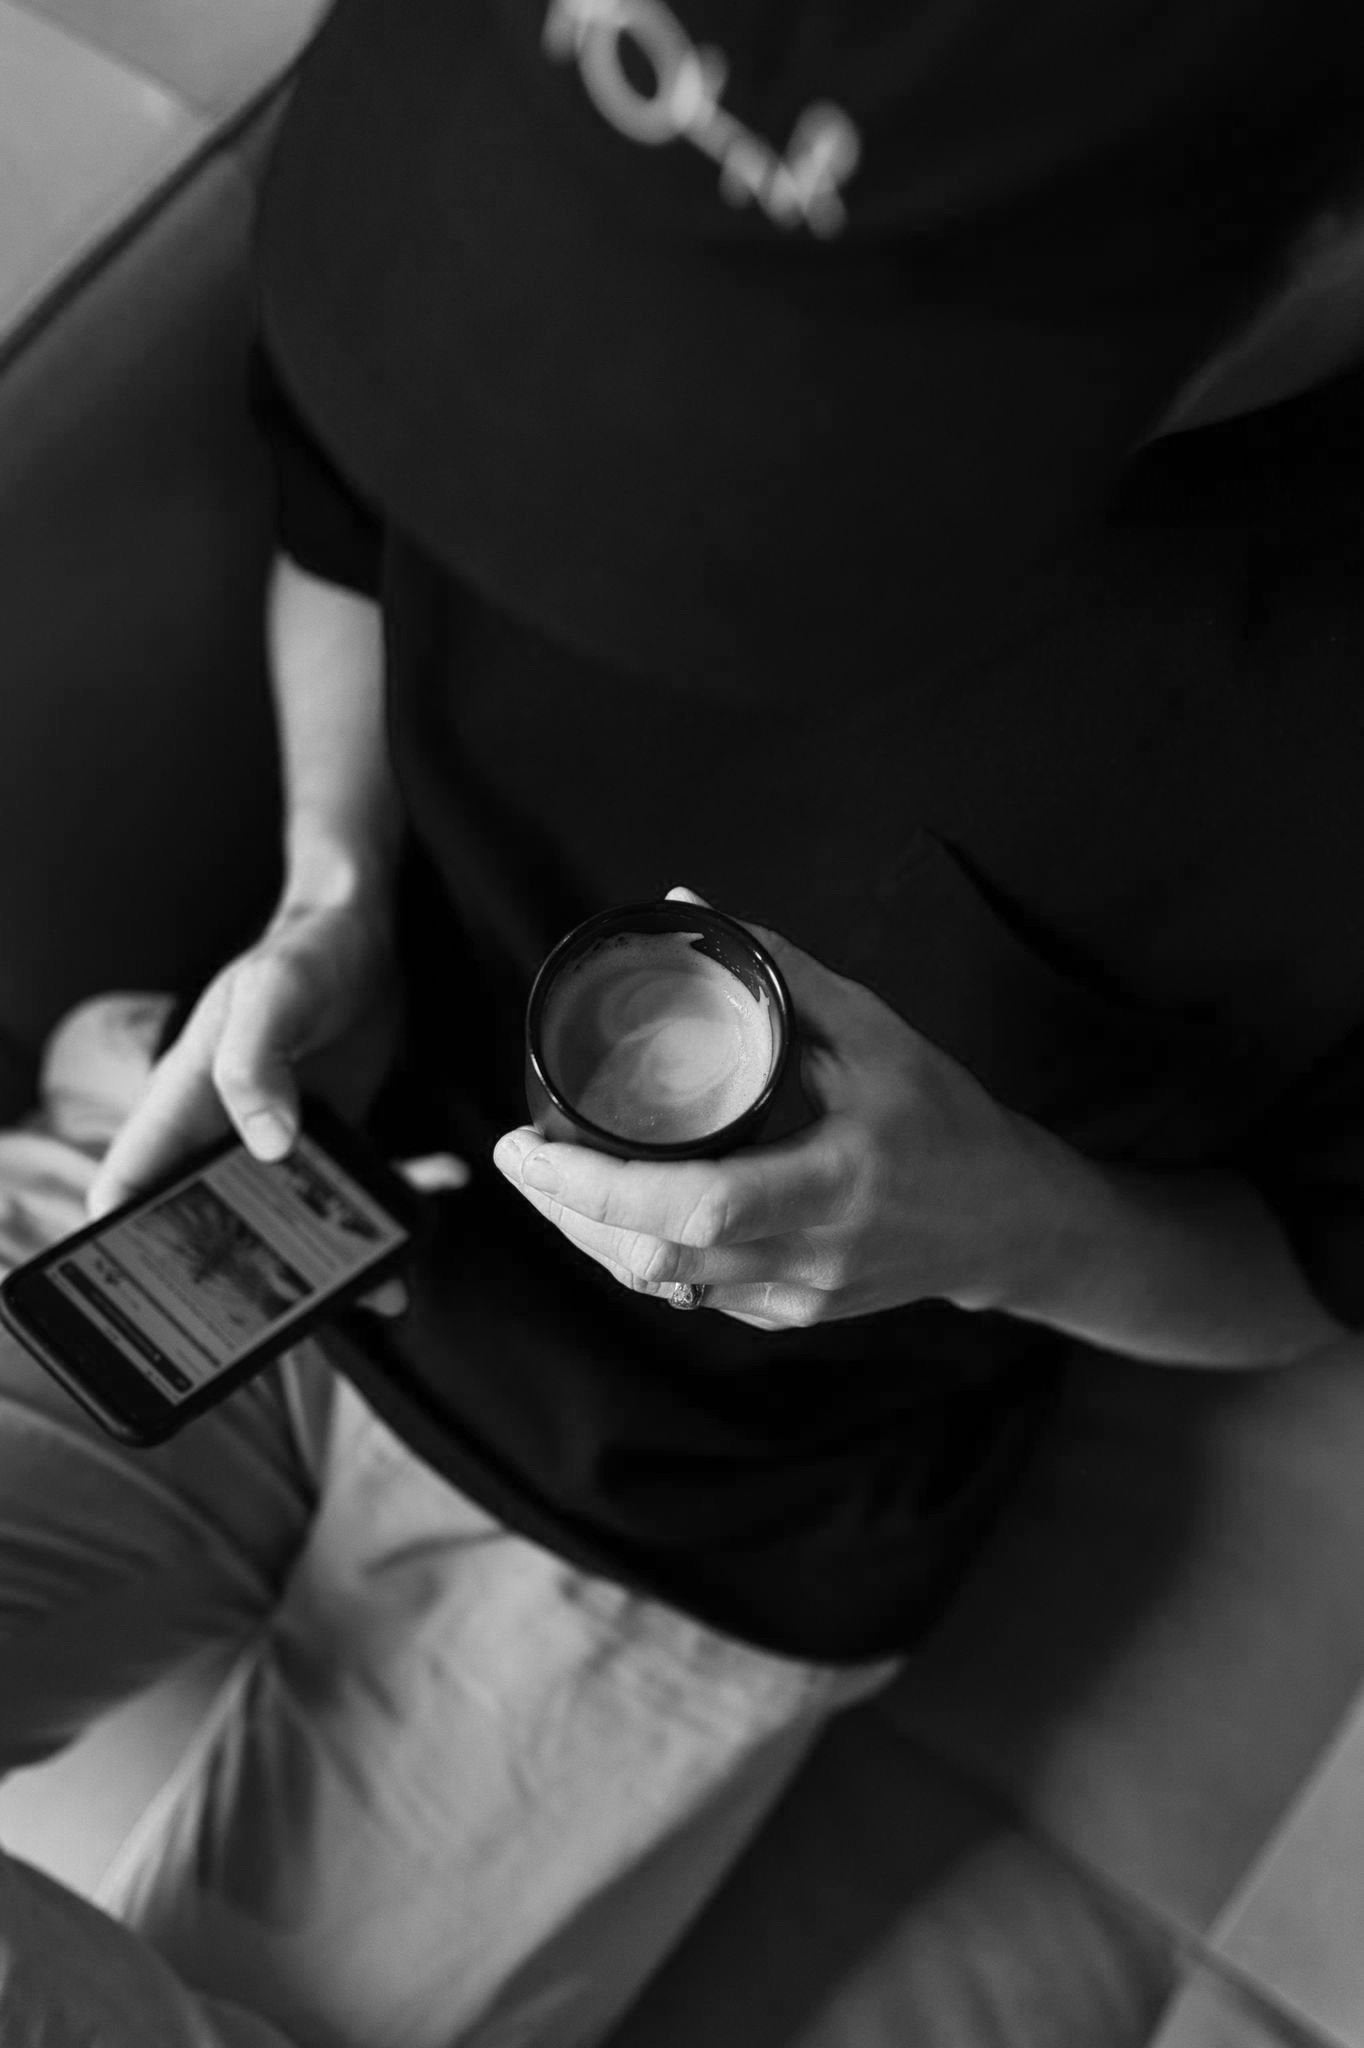 Man drinking coffee while looking at mobile phone